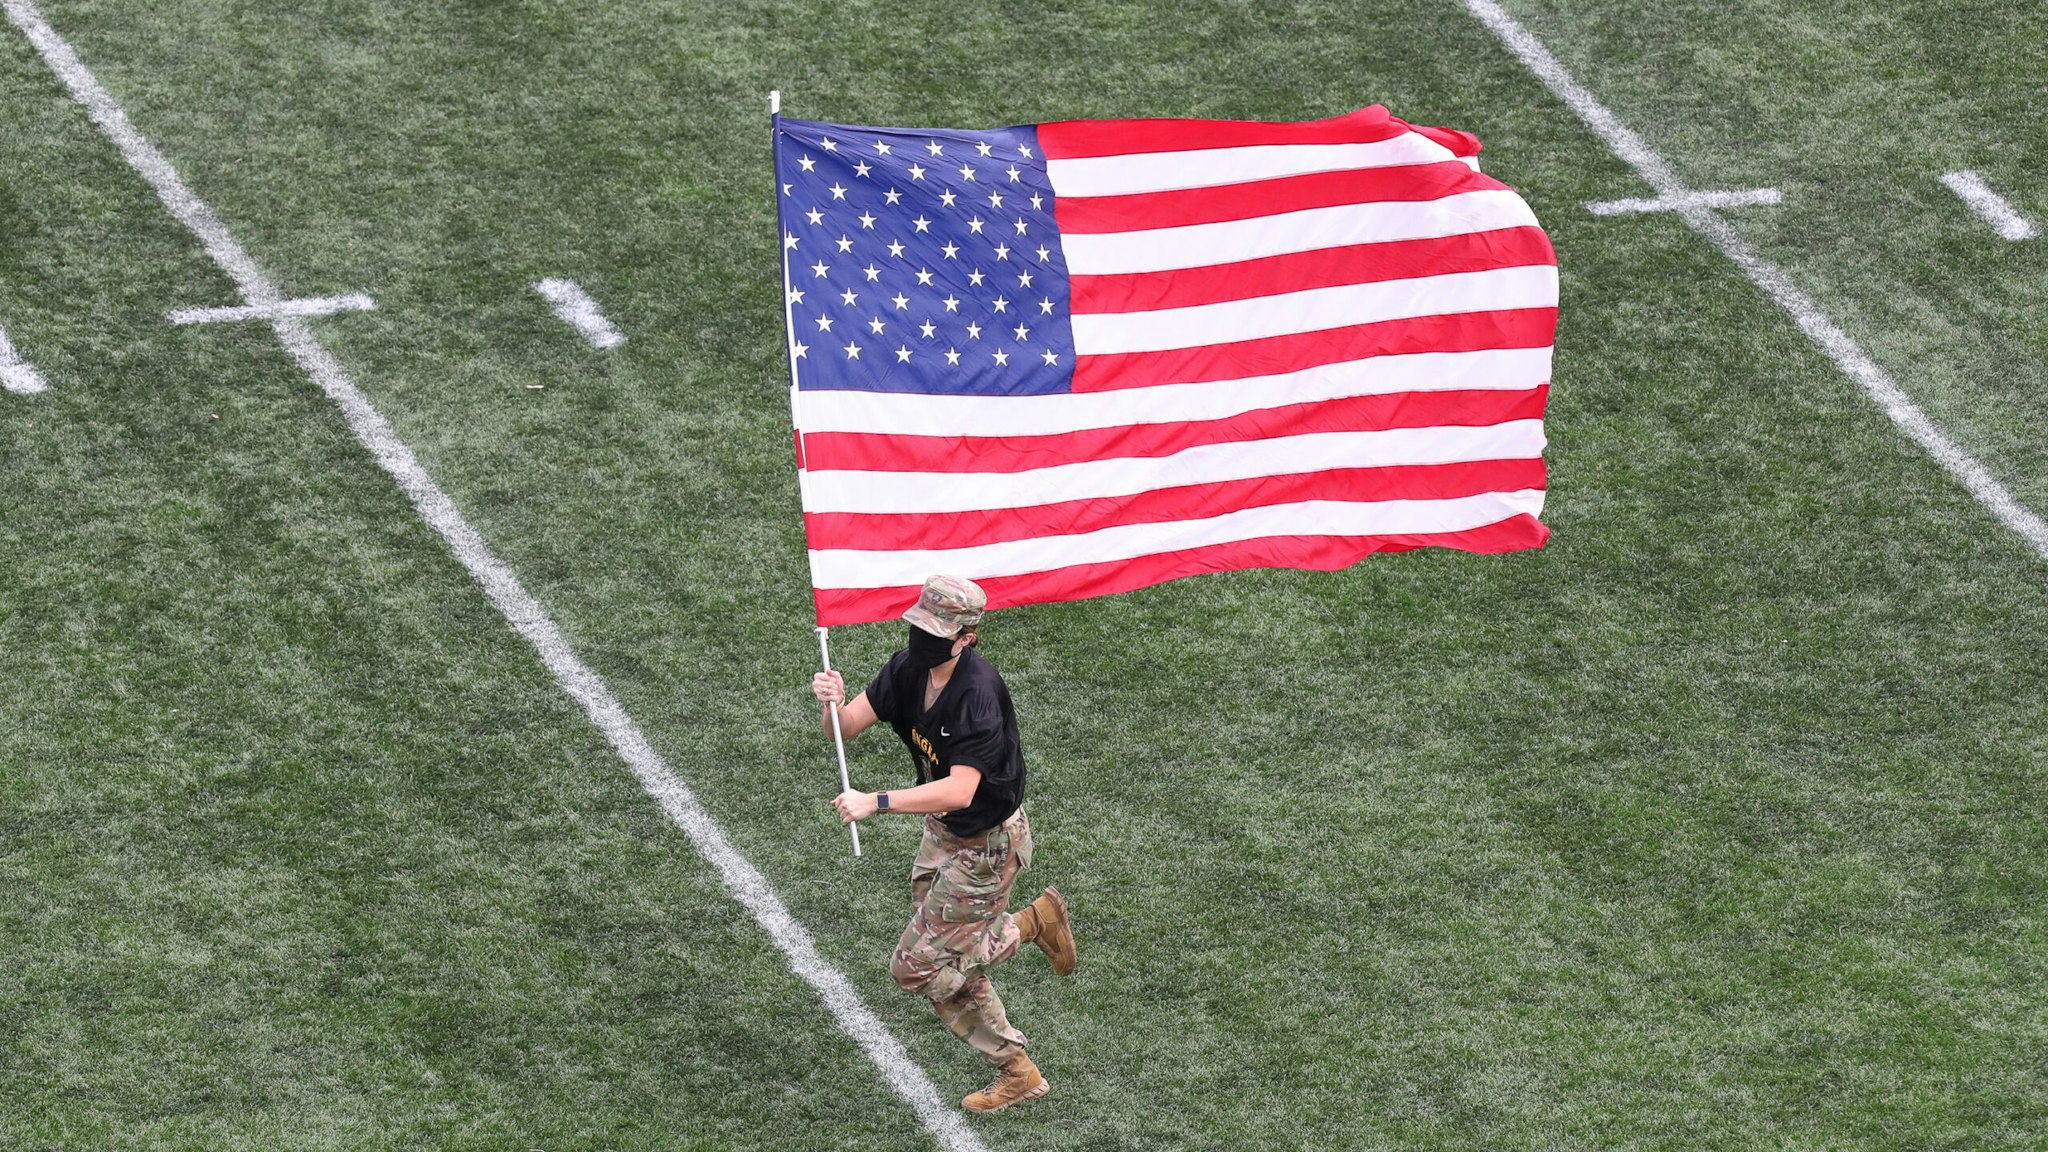 WEST POINT, NY - NOVEMBER 21: An Army Cadet carries the American Flag on the filed prior to the game against the Georgia Southern Eagles at Michie Stadium on November 21, 2020 in West Point, New York.